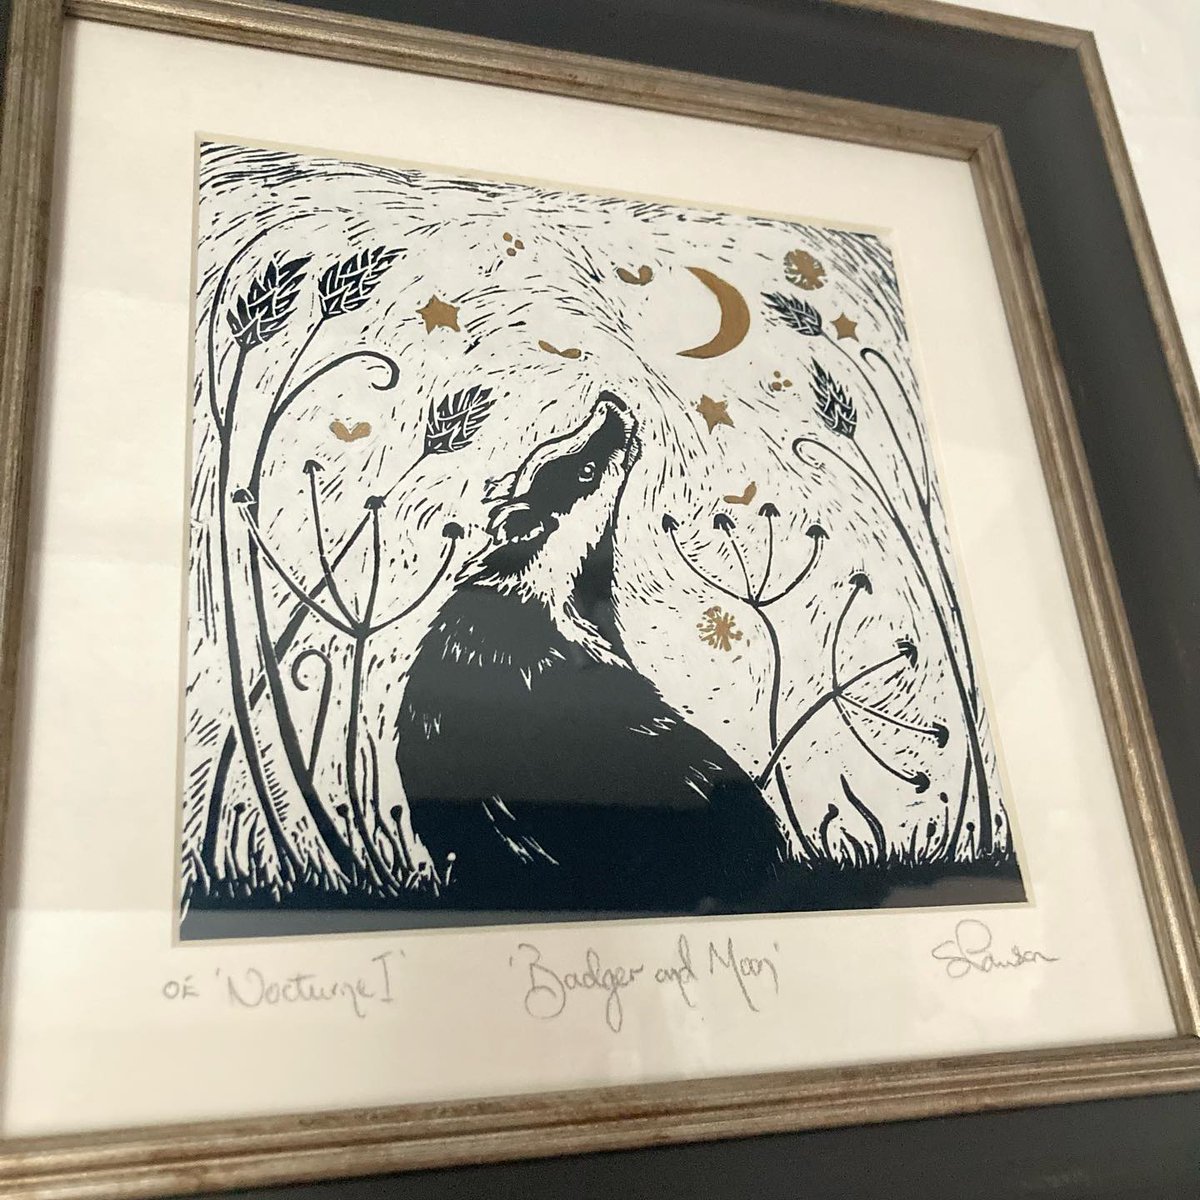 It was lovely to see Sarah of Thistledown Linoprints,  bringing us some more of her popular Nocturne series and a beautiful swan! #Ingleton #Artistontwitter #shopindie #yorkshireartist #linocut